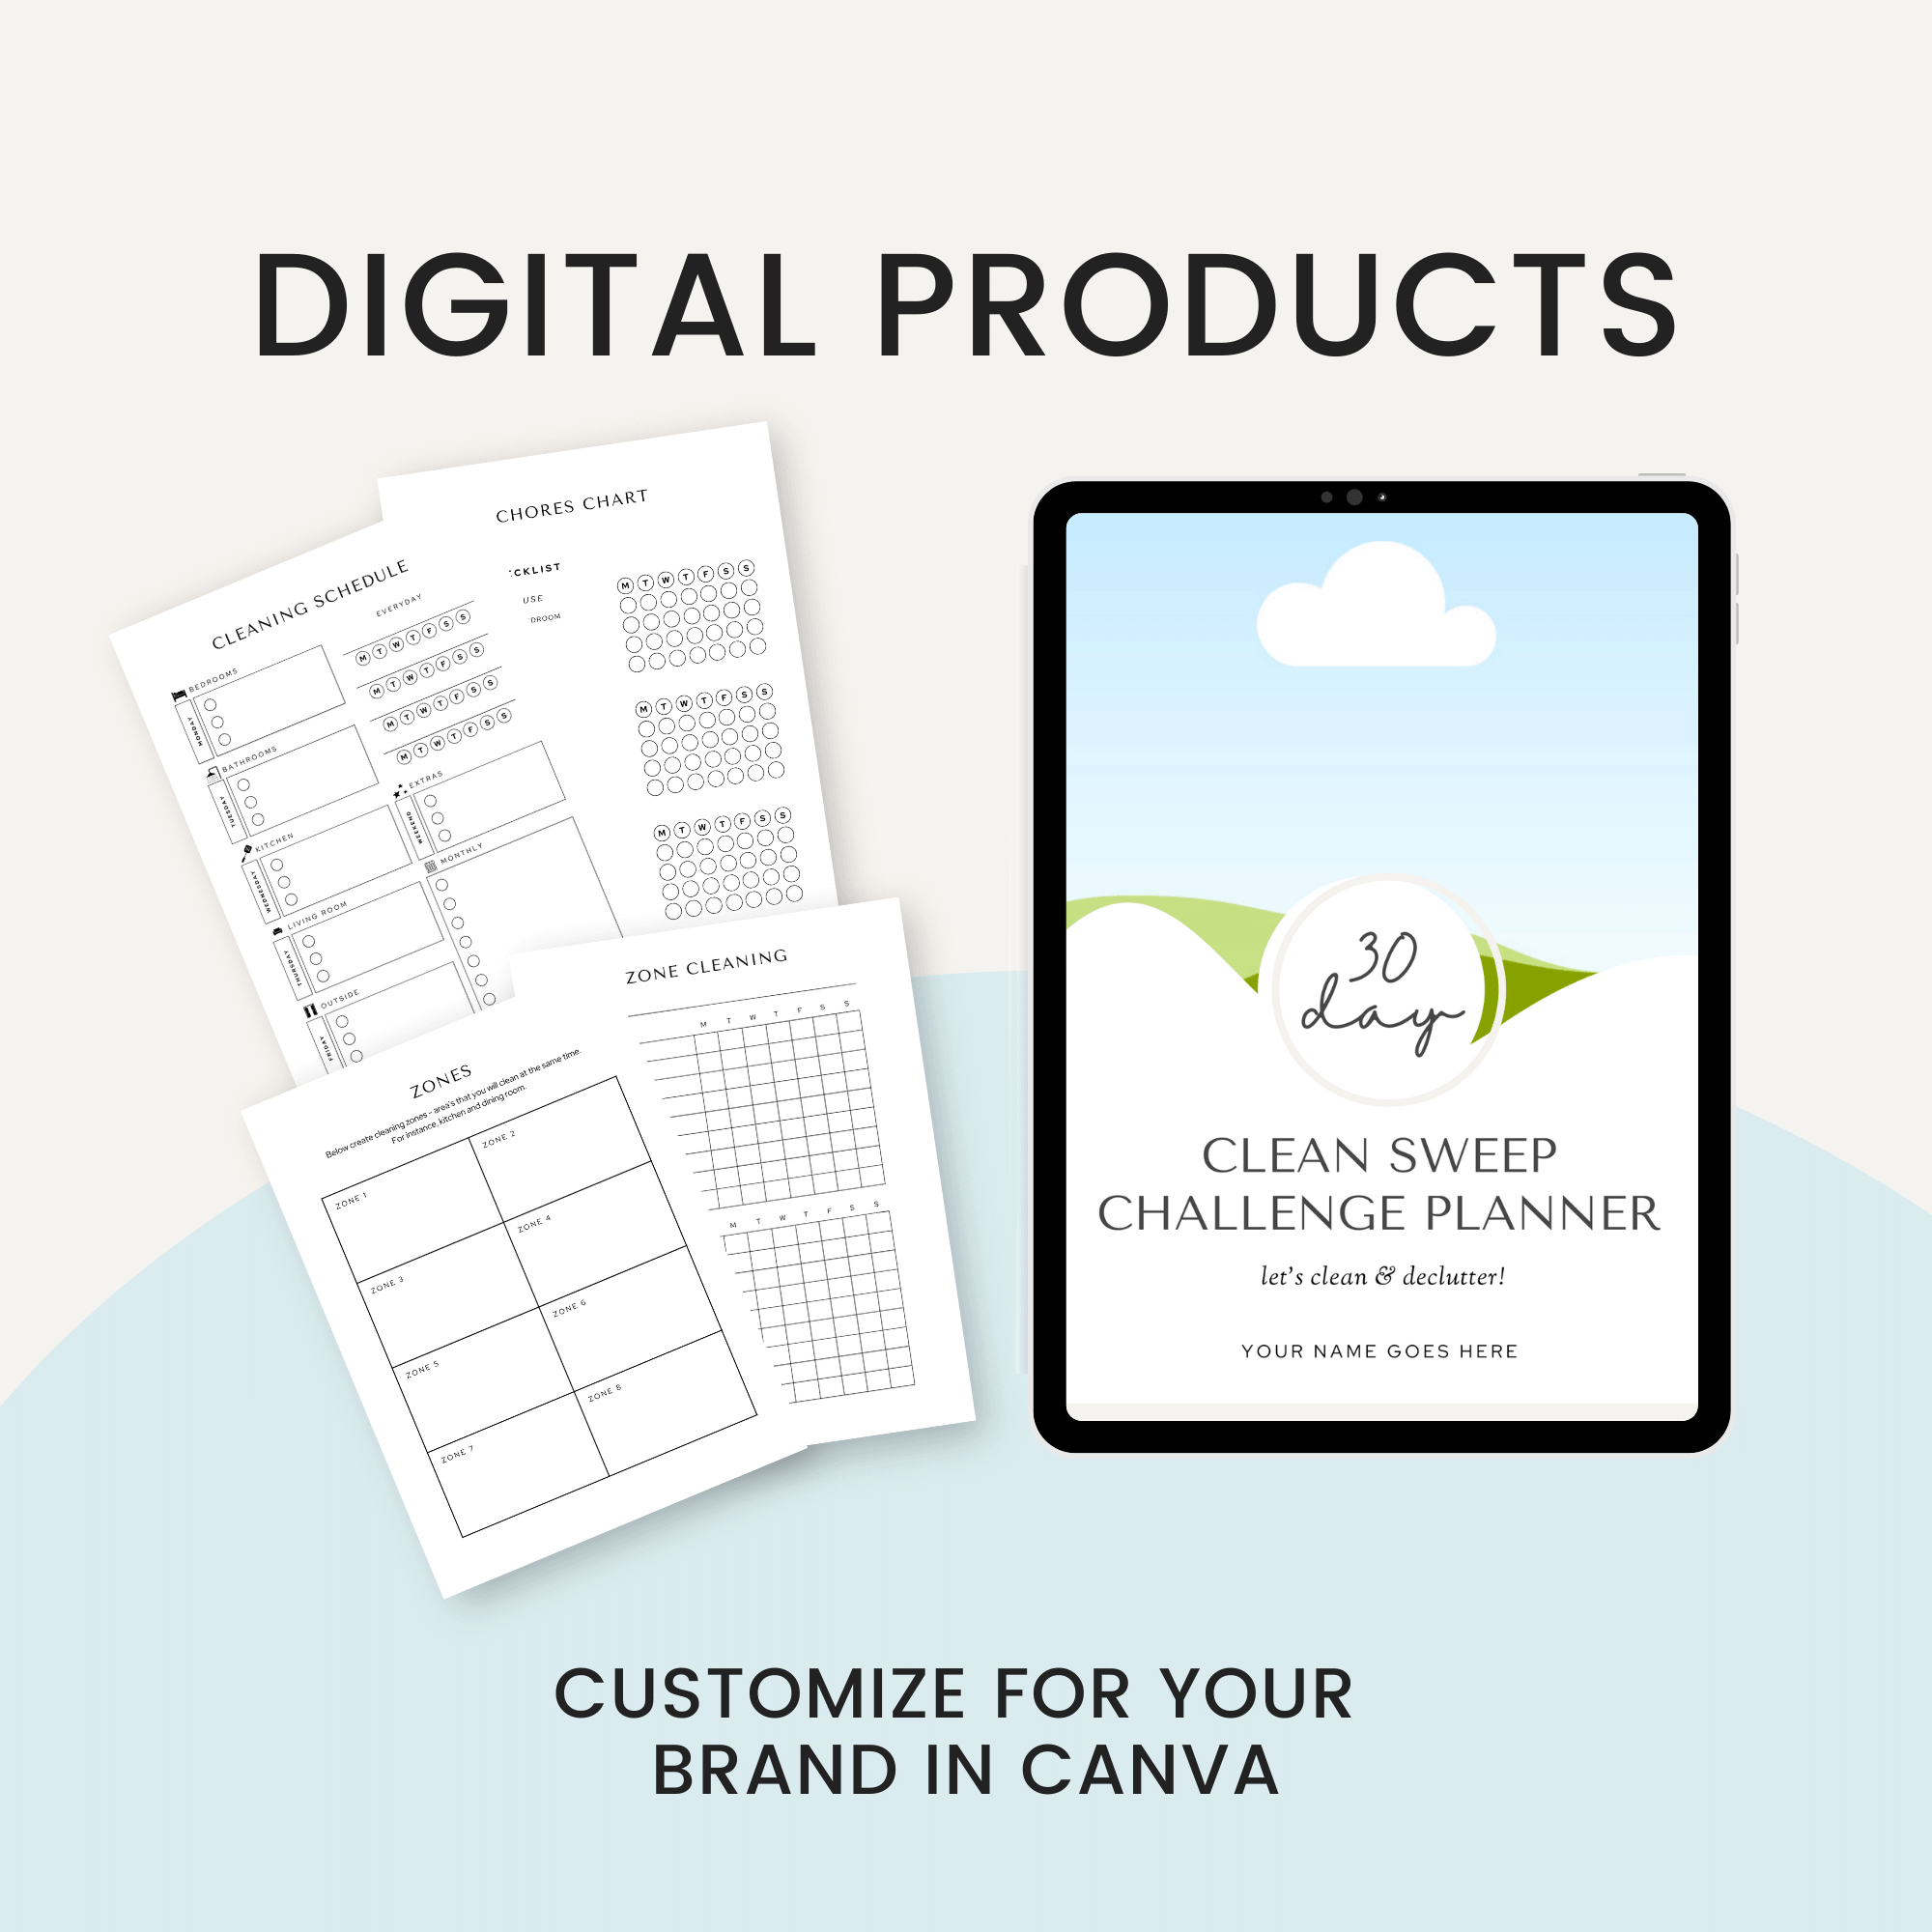 30-Day Clean Sweep Challenge Planner Digital Products Customize in Canva